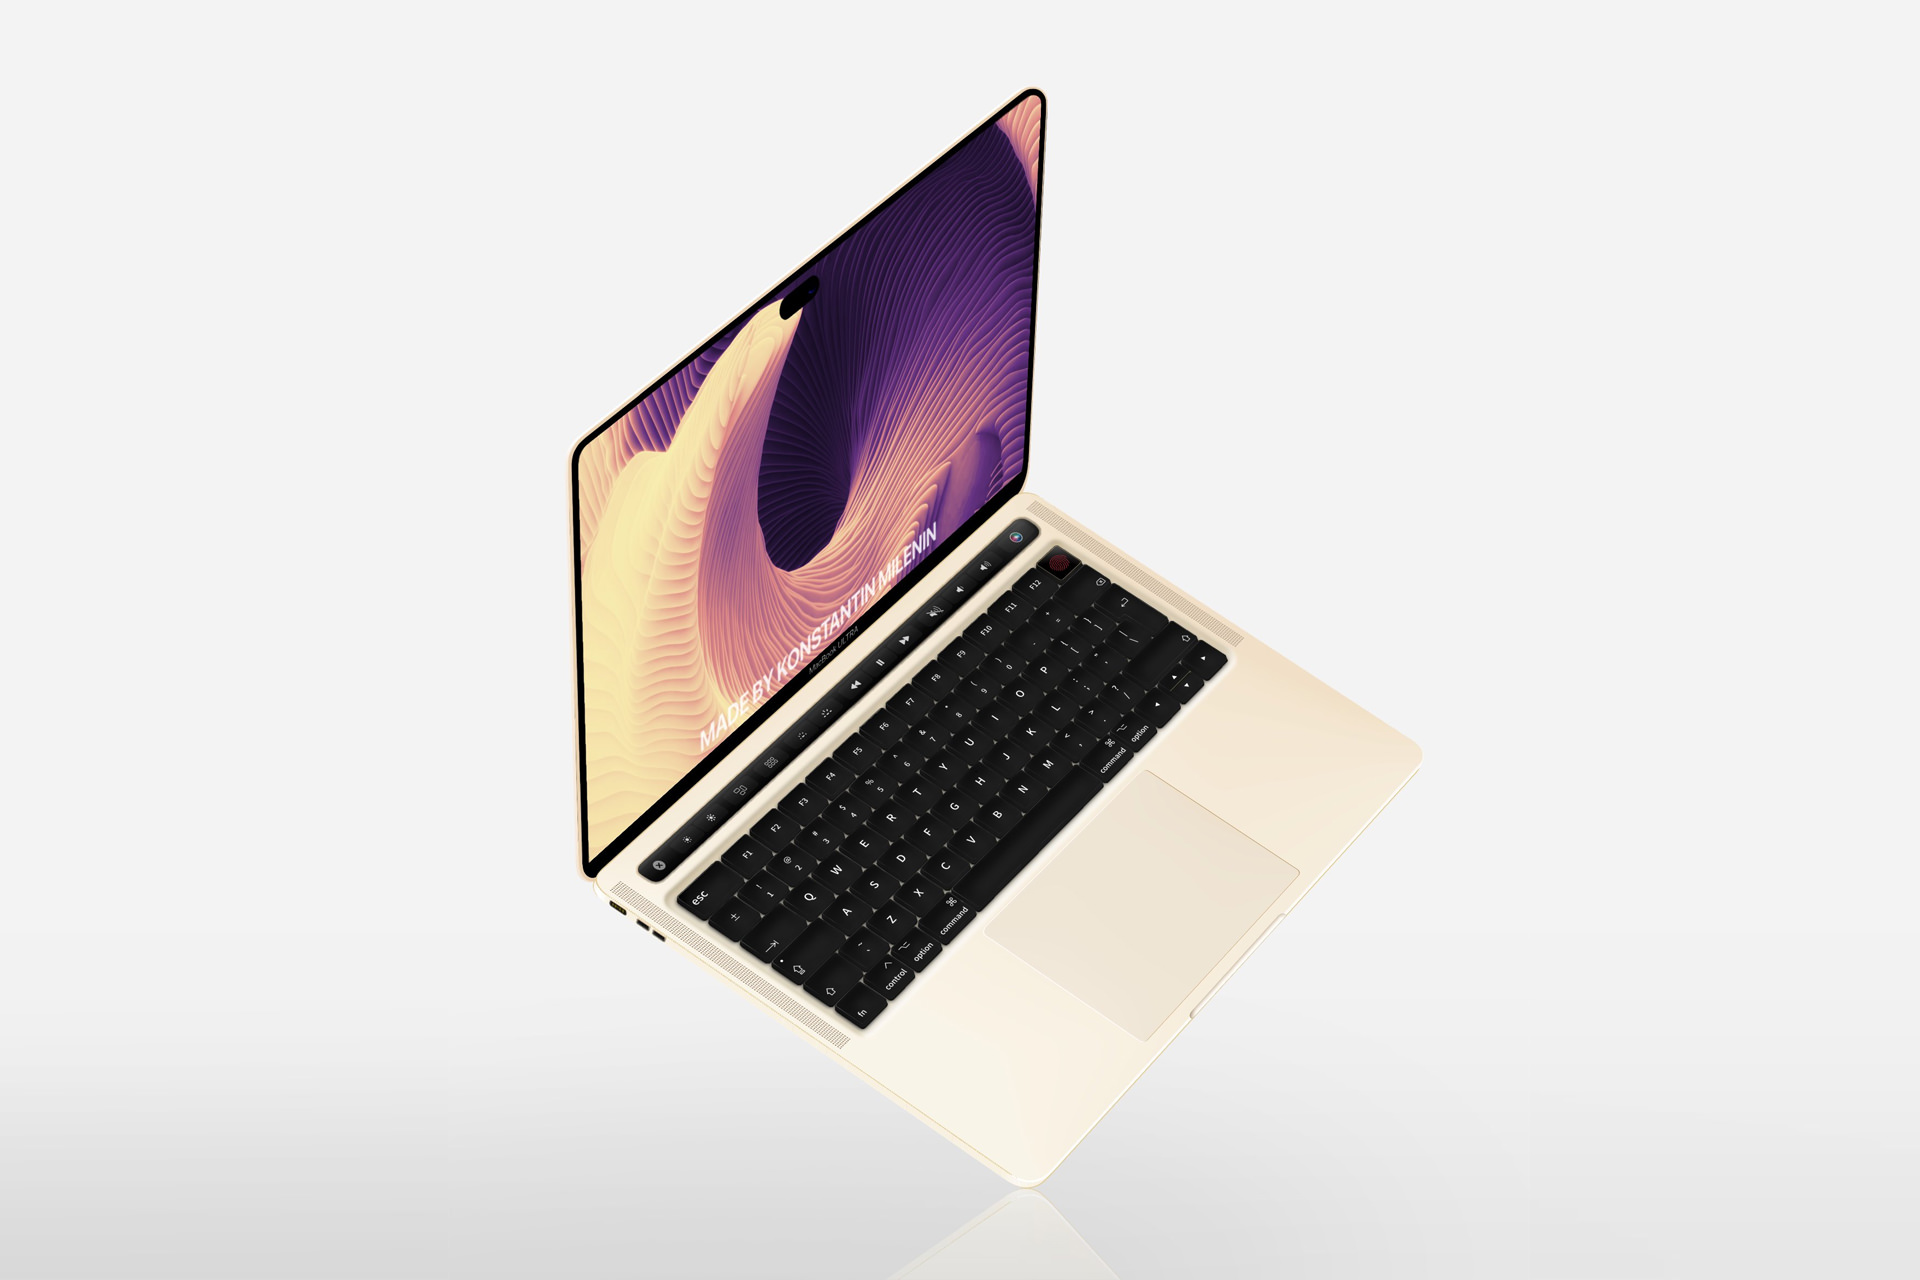 Macbook equipped with Golden Concept Dynamic Island capsule cavity